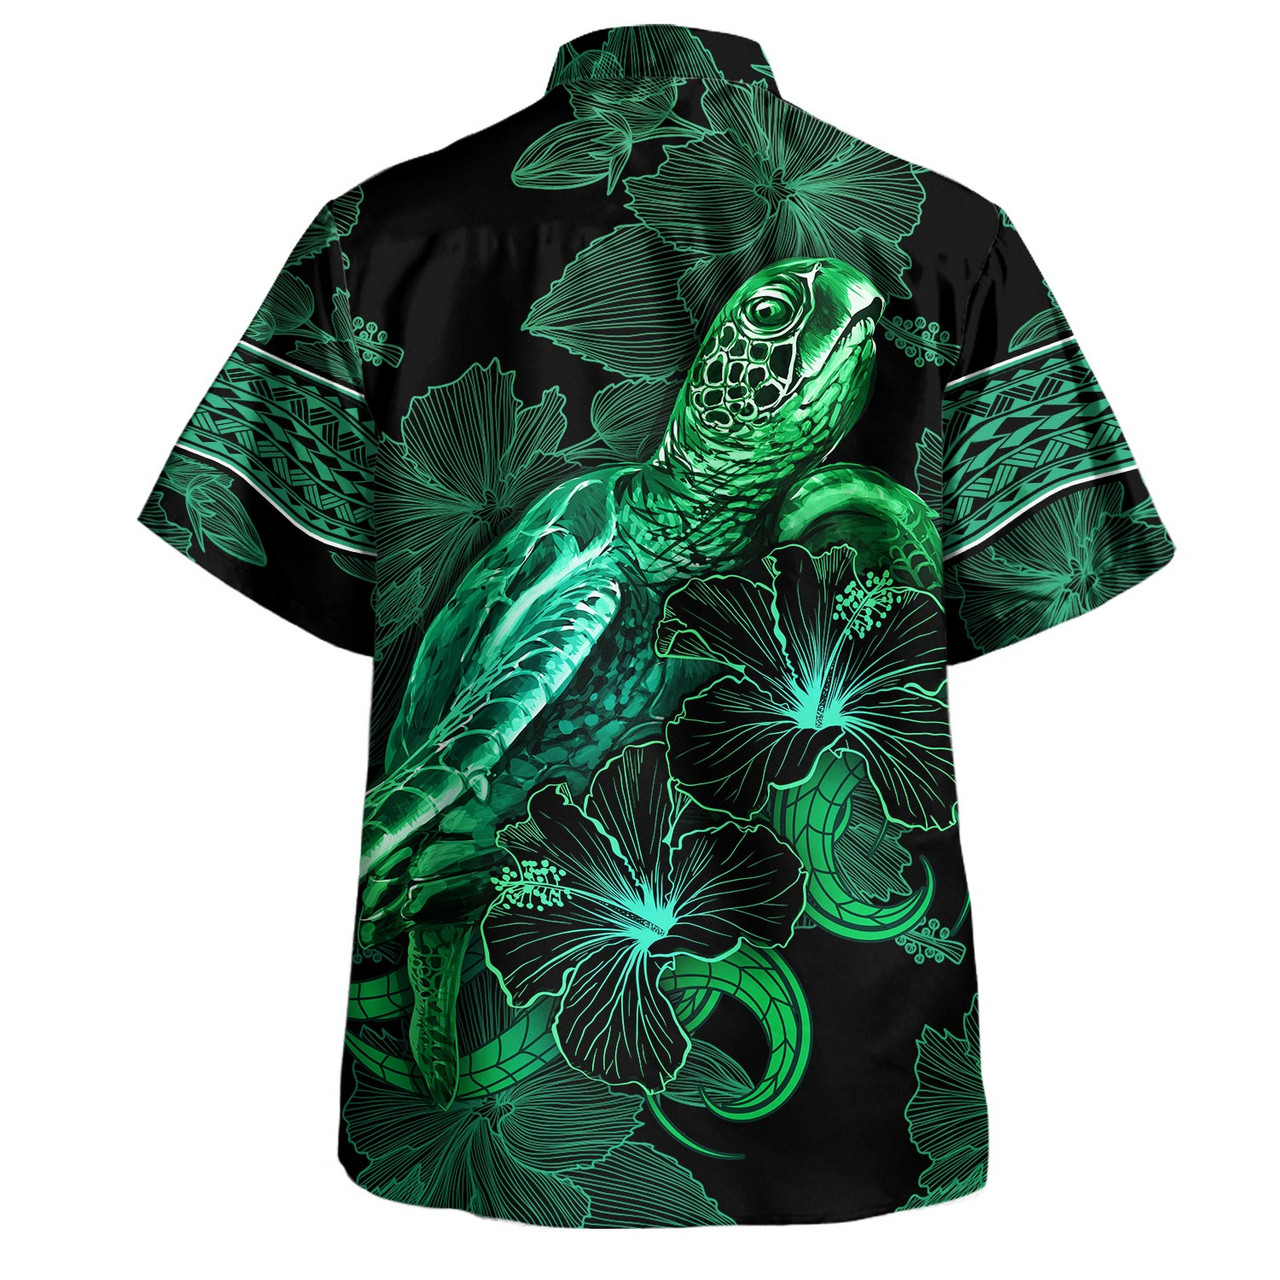 Federated States Of Micronesia Hawaiian Shirt  Sea Turtle With Blooming Hibiscus Flowers Tribal Green